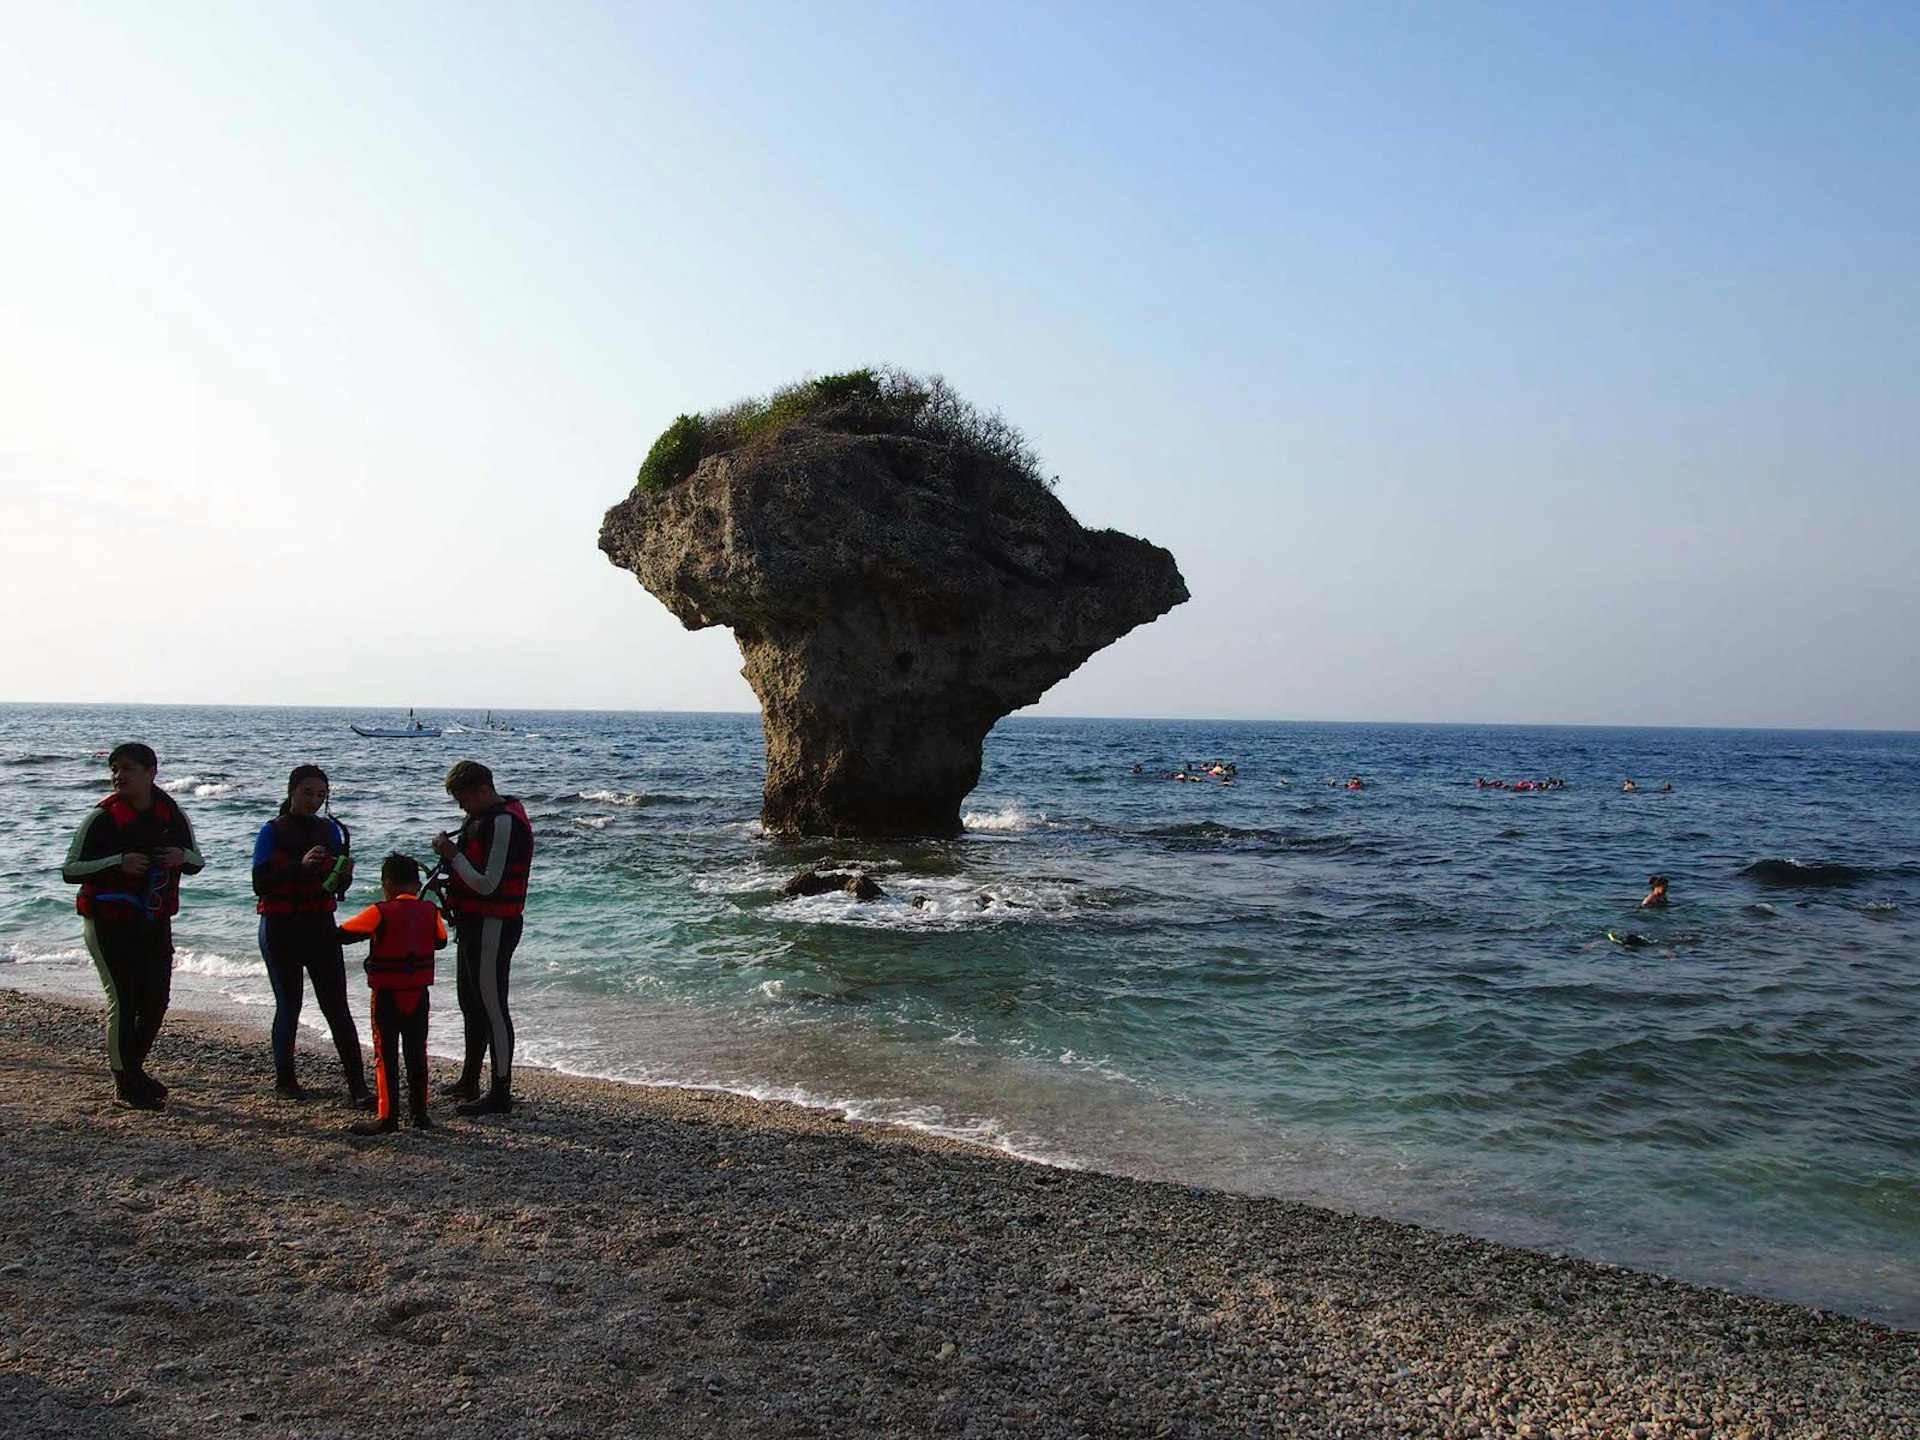 A family prepares to go snorkelling on the beach in front of Vase Rock. The waters around Vase Rock are the most popular place for snorkelling © Tess Humphrys / Lonely Planet